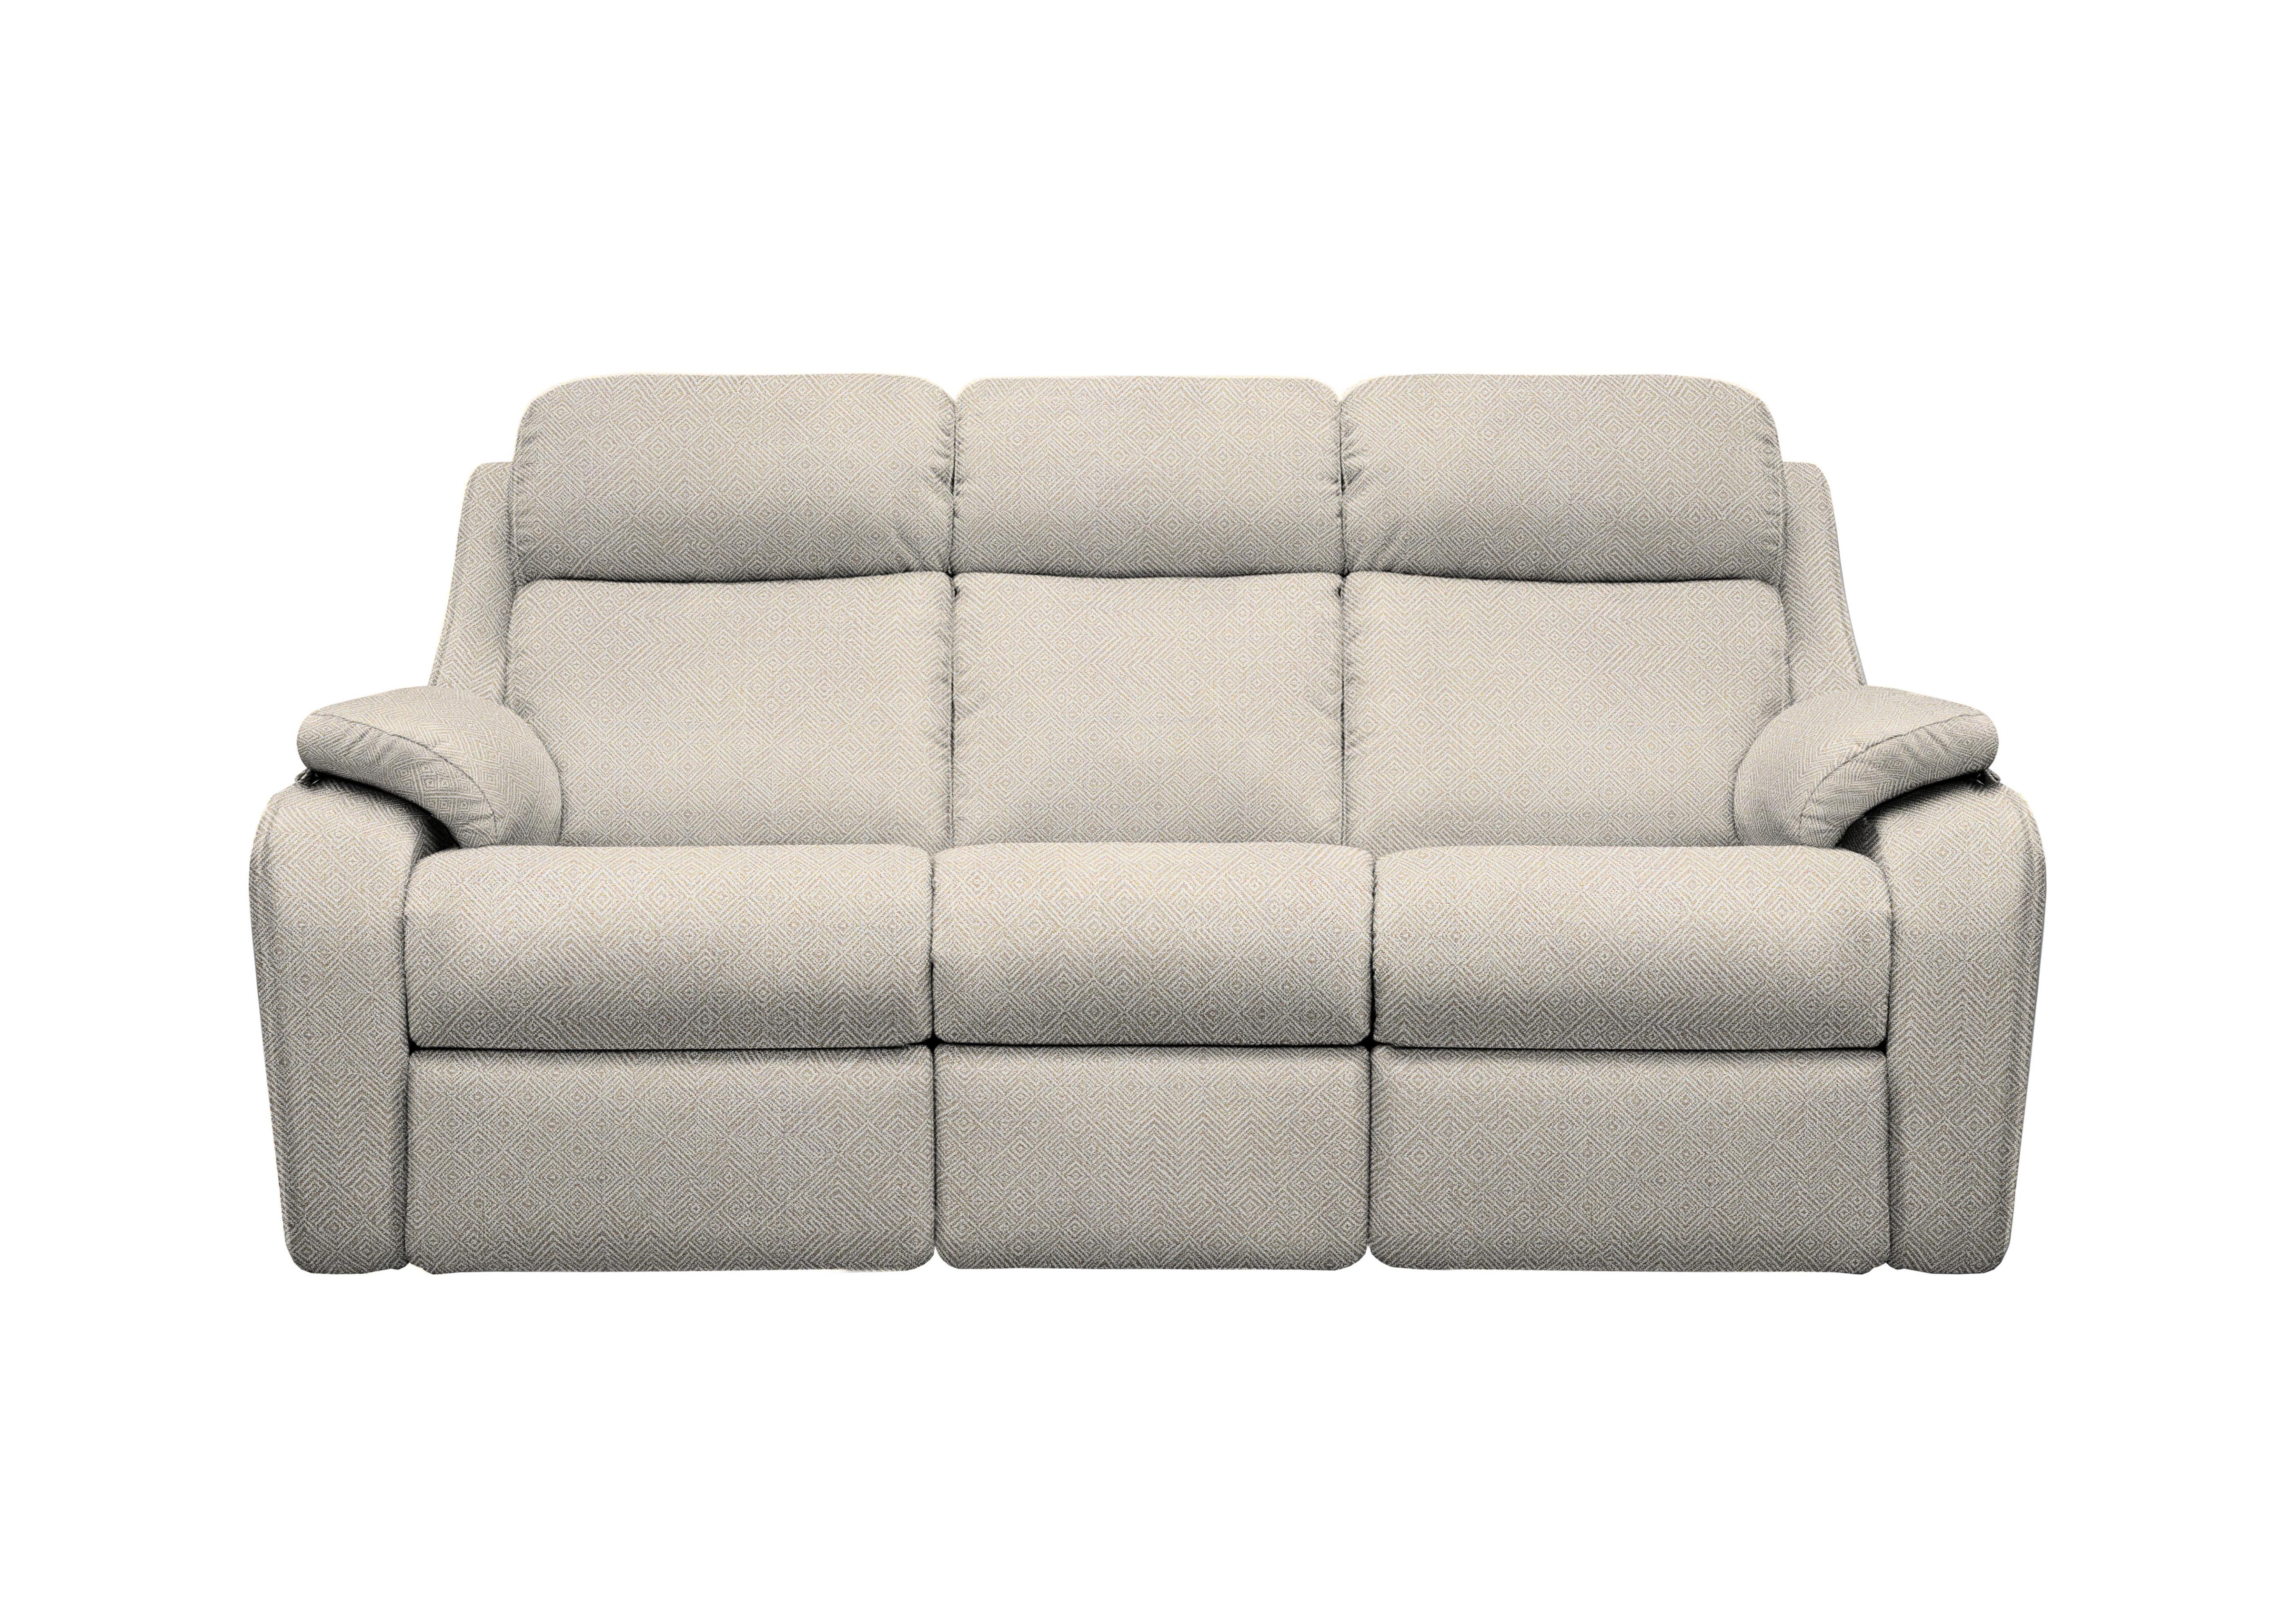 Kingsbury 3 Seater Fabric Power Recliner Sofa with Power Headrests in B011 Nebular Blush on Furniture Village